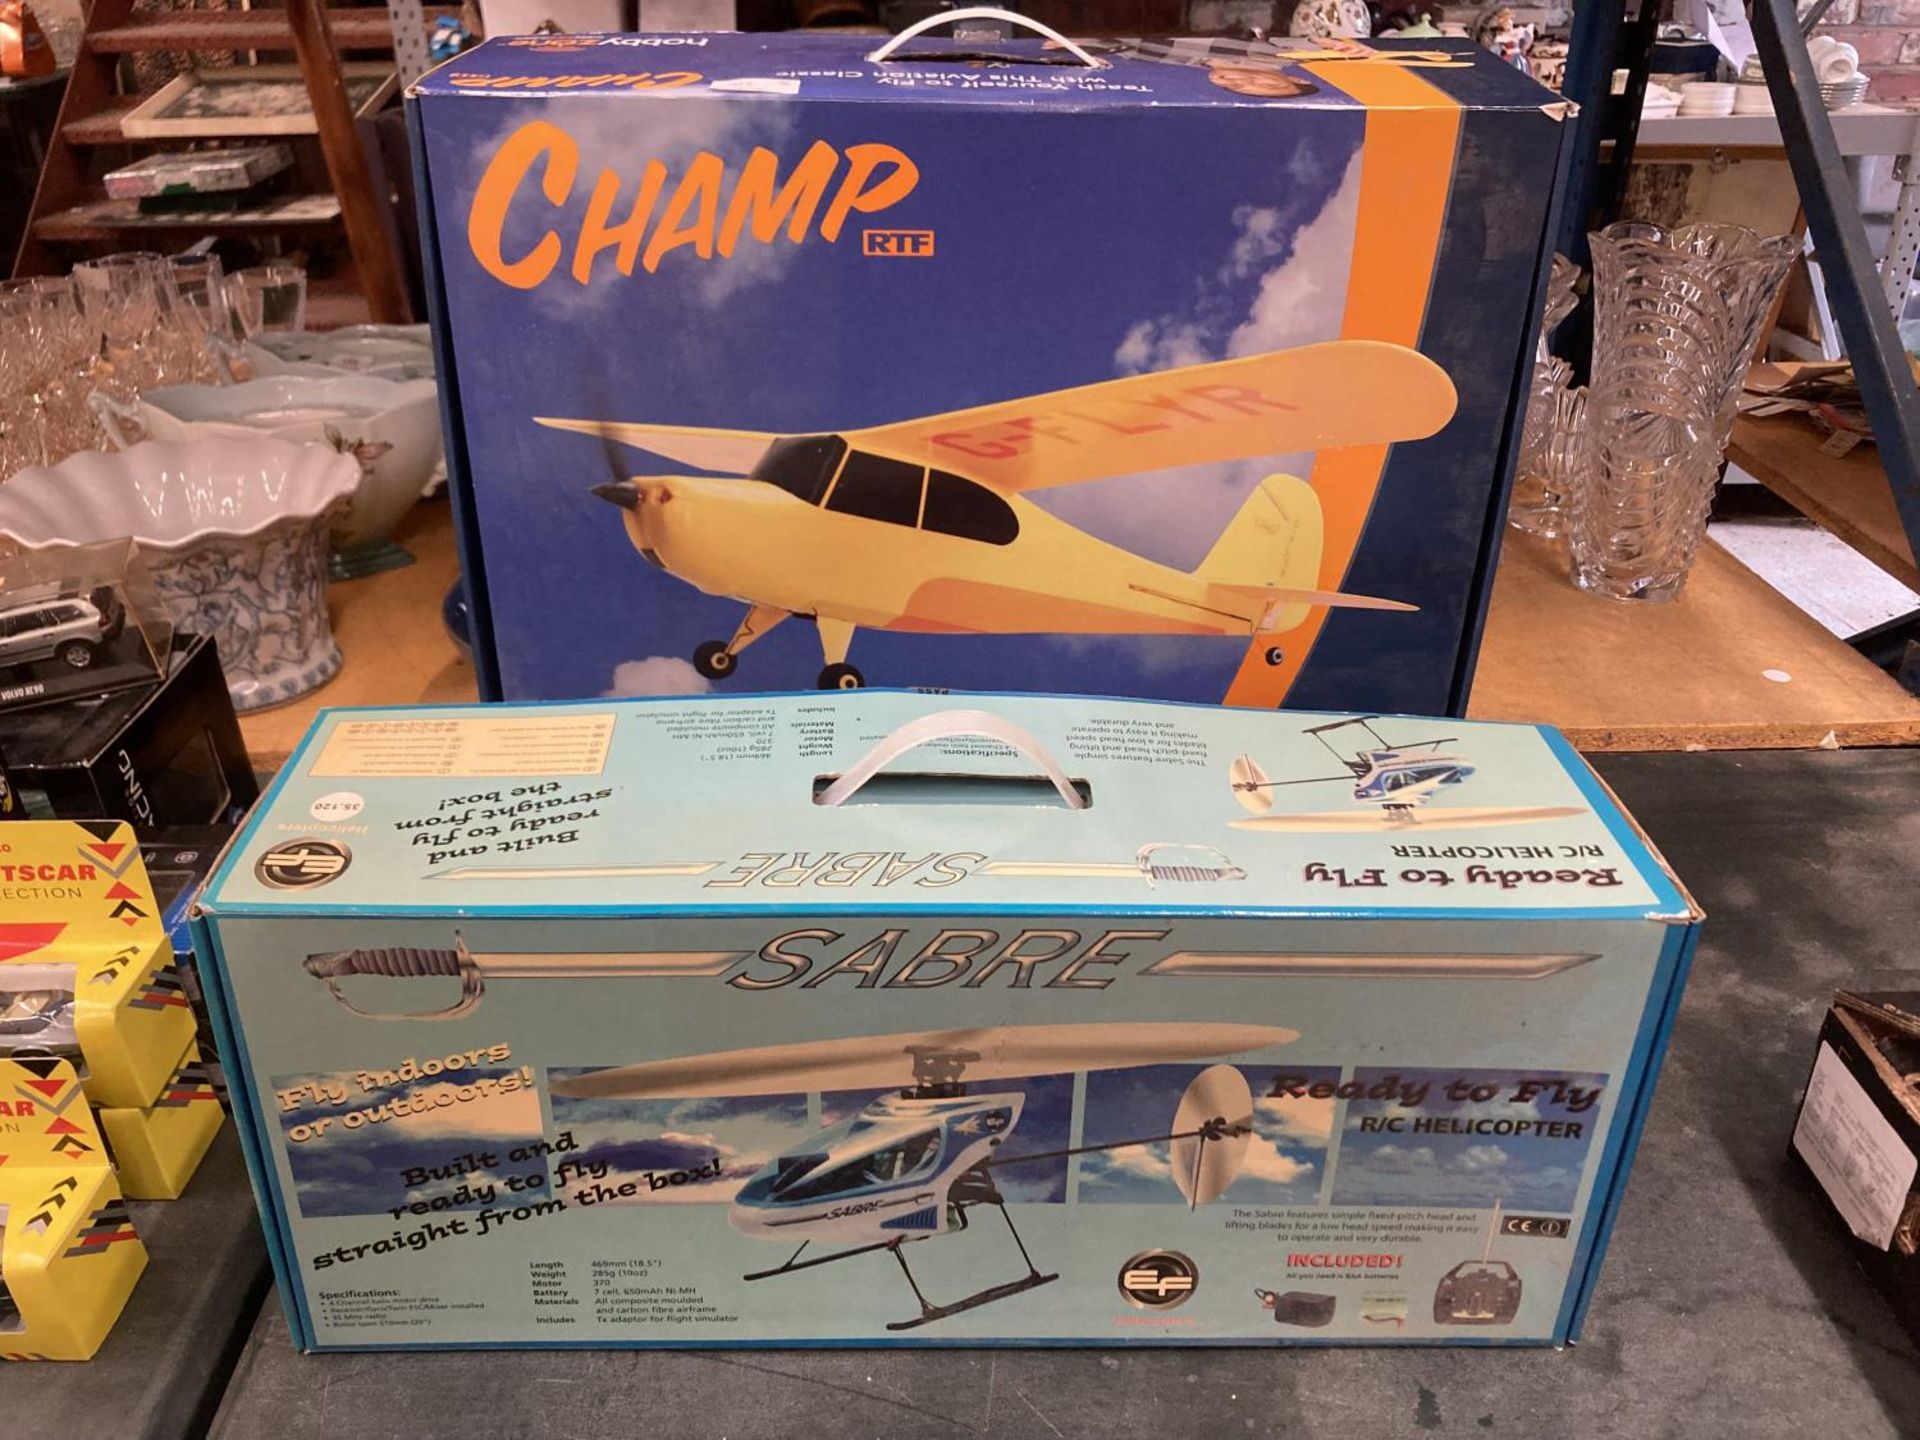 A BOXED SABRE READY TO FLY R/C HELICOPTER AND A HOBBYZONE R/C AREOPLANE, BOTH CONTROLLERS PRESENT